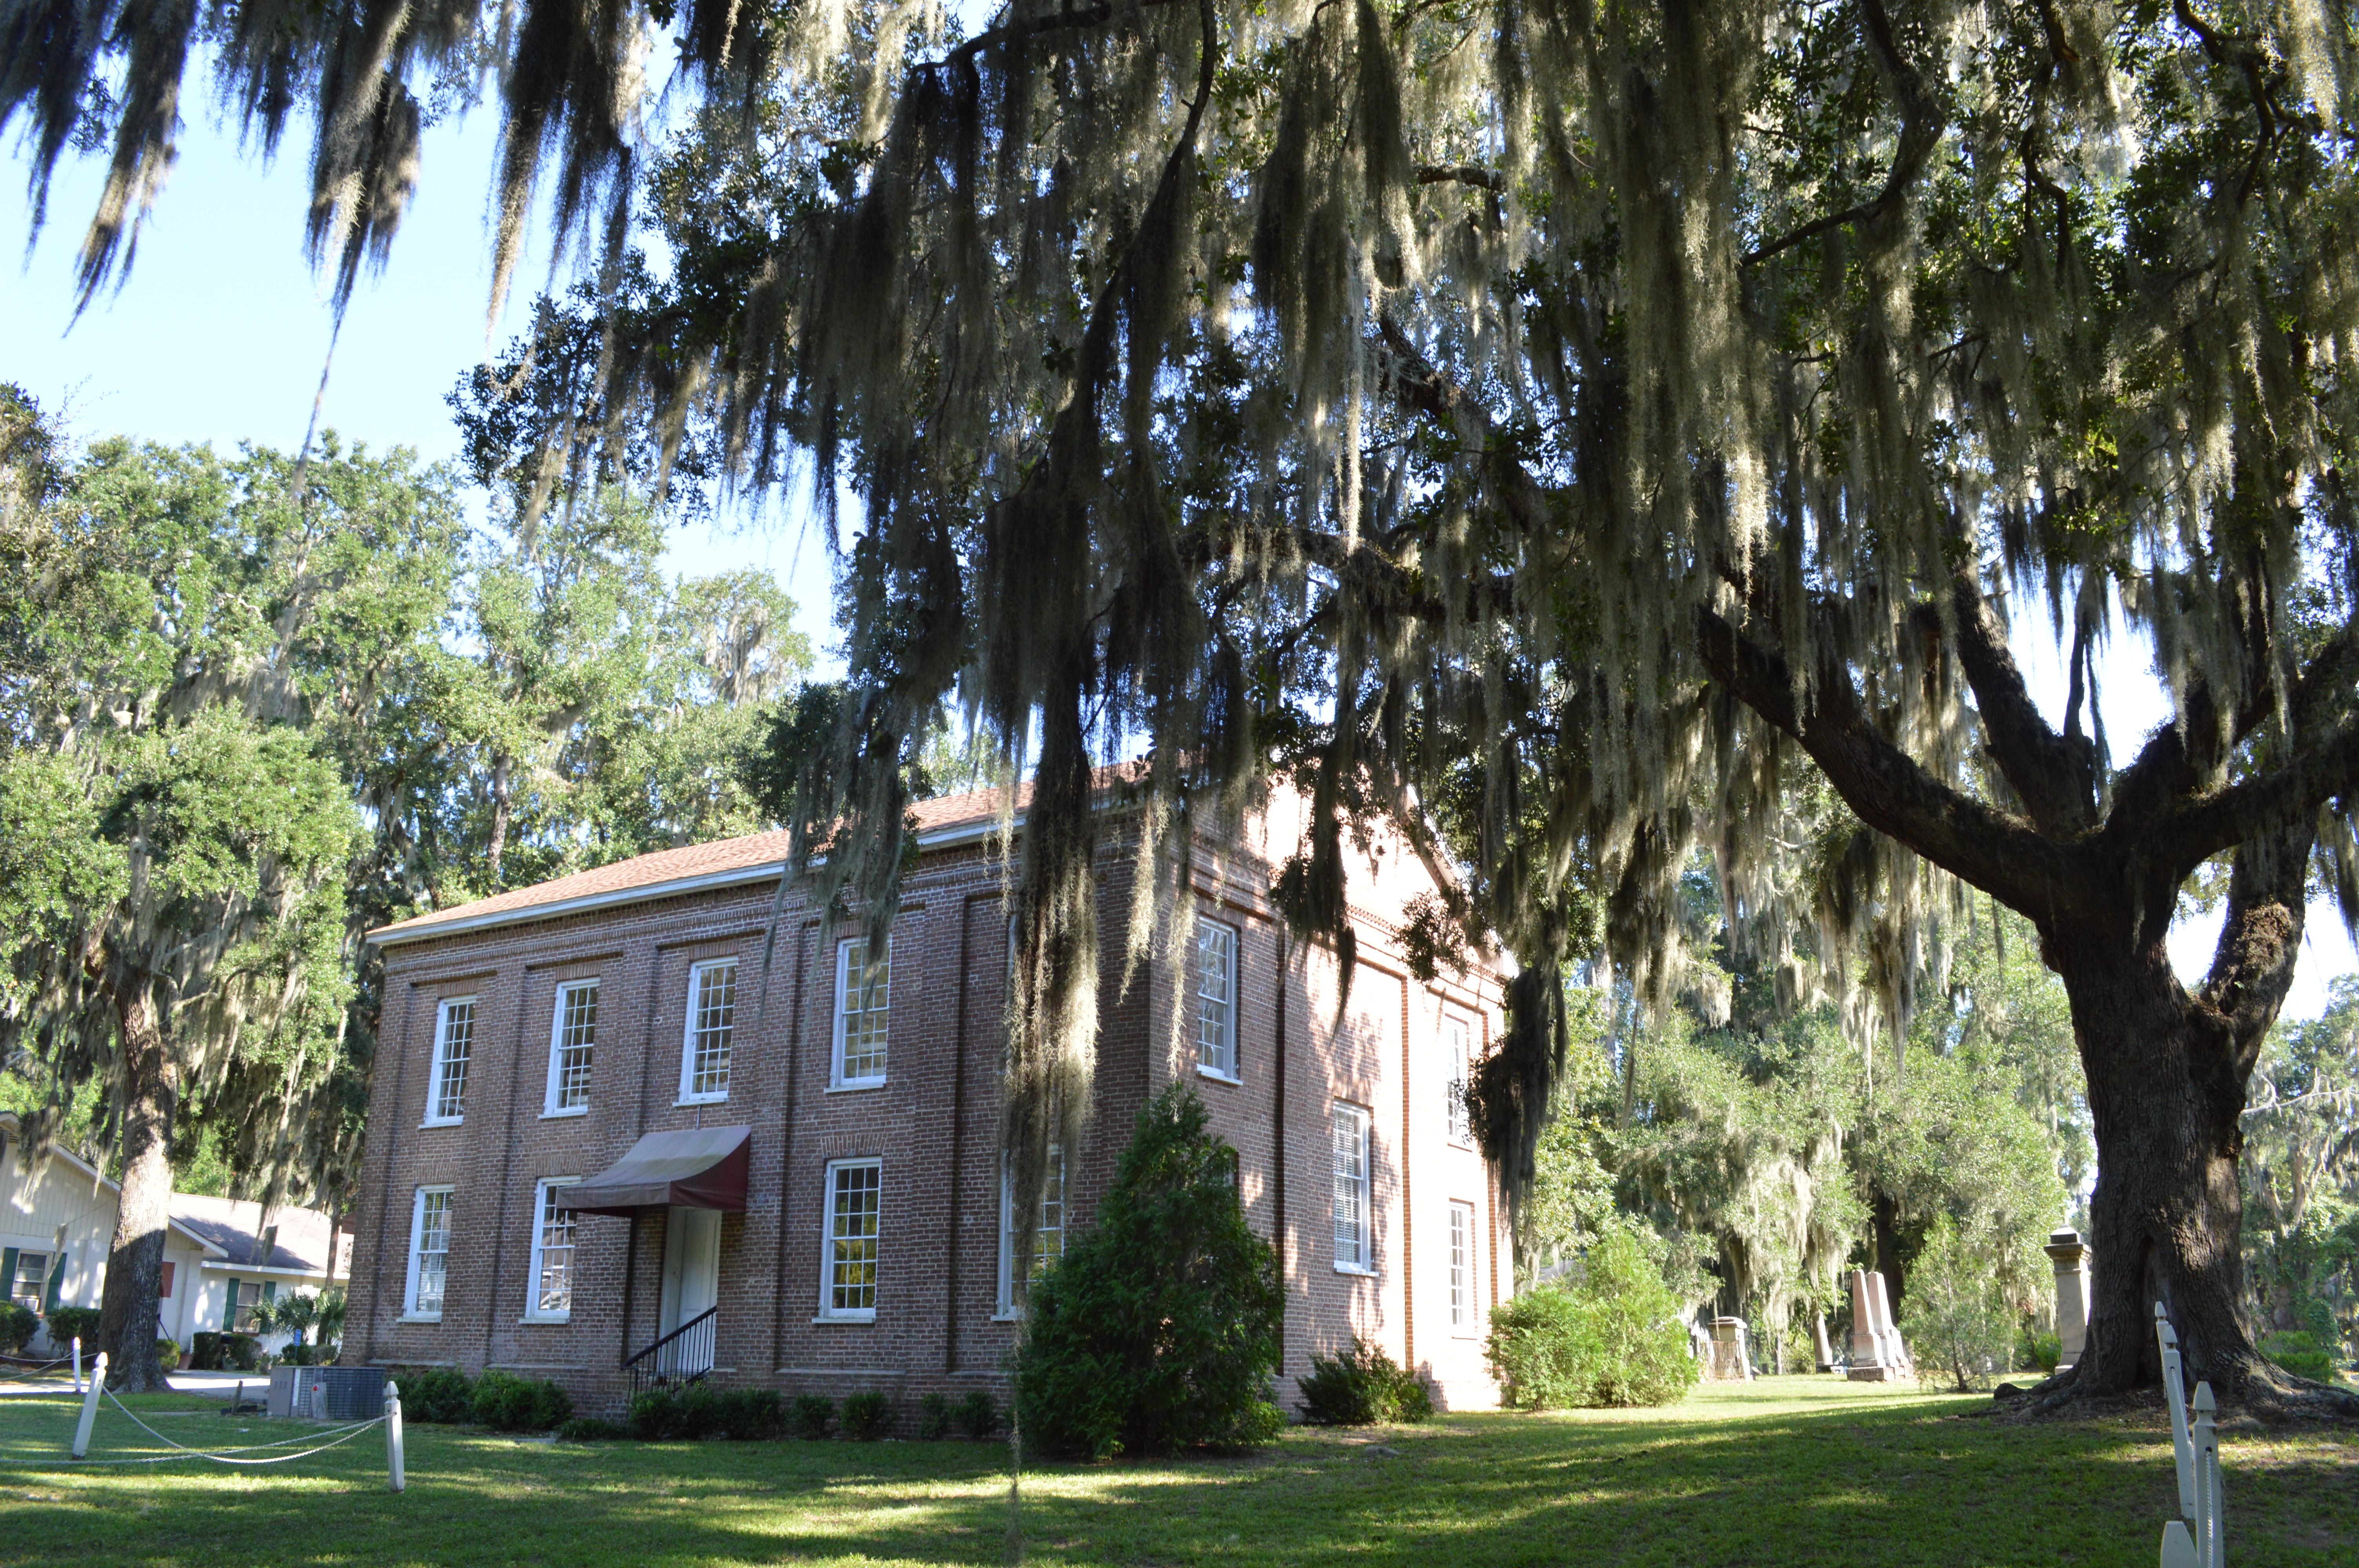 A two story brick building flanked by large live oak trees